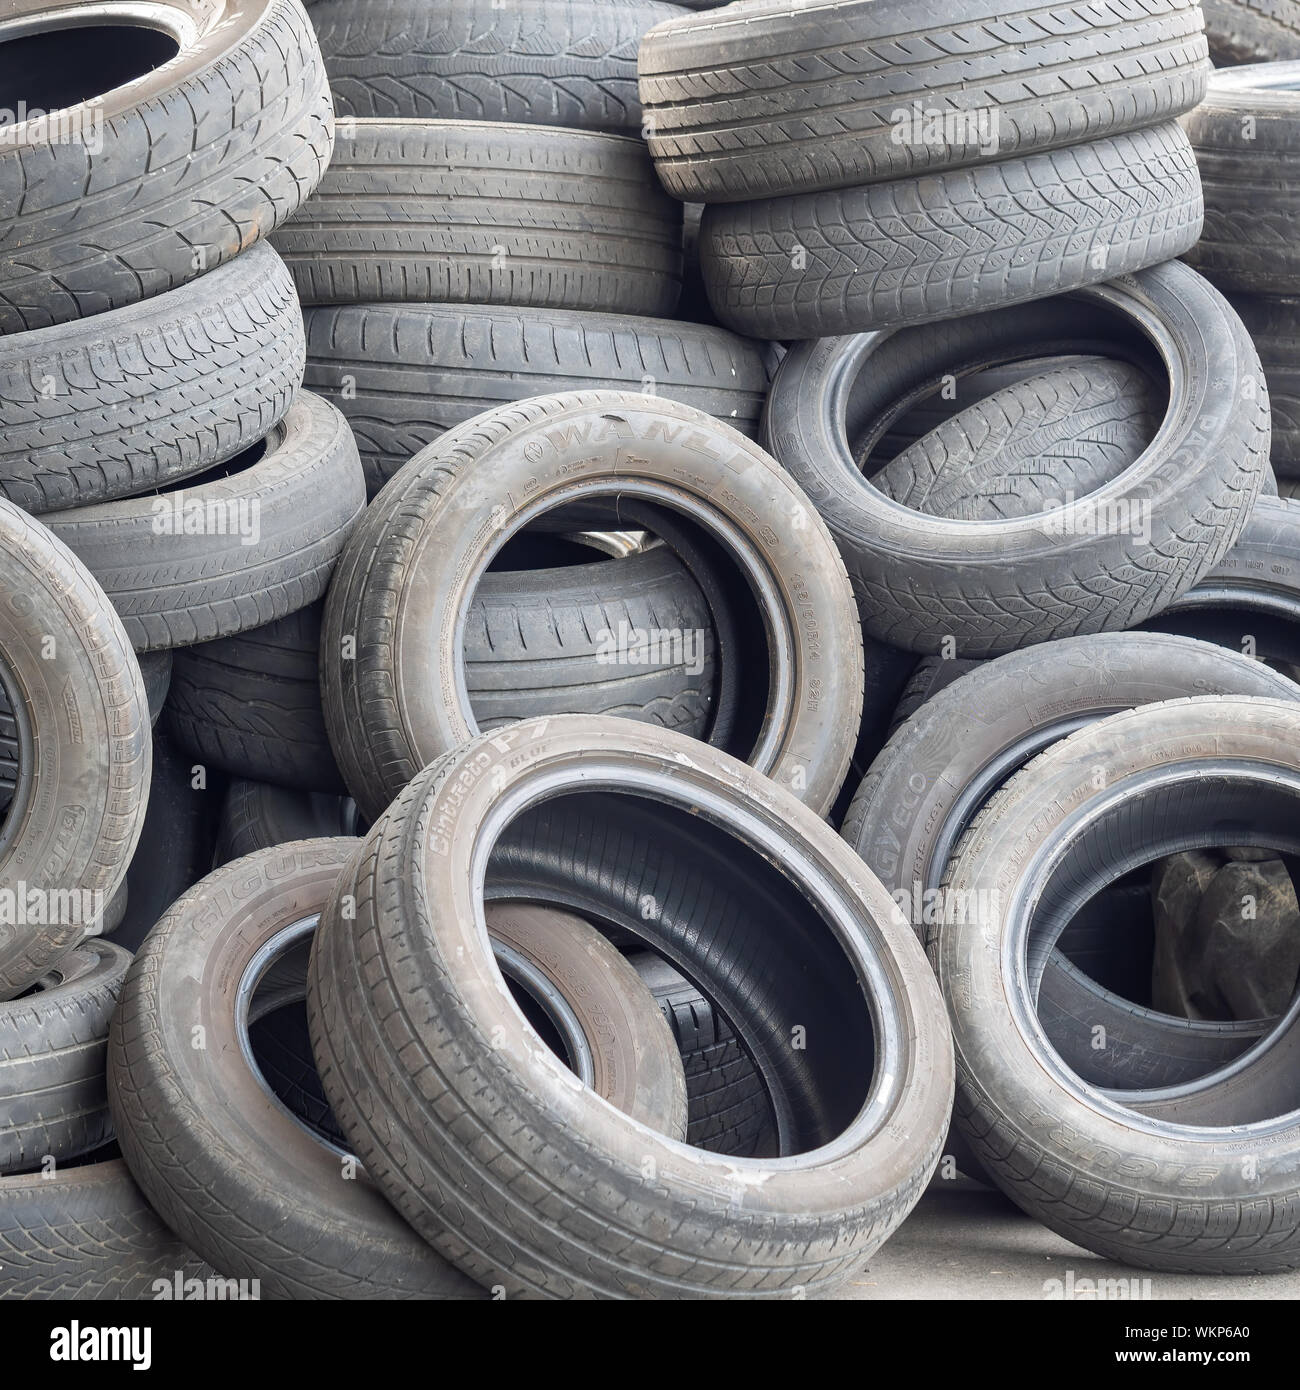 AULLA, MASSA CARRARA, ITALY - AUGUST 28, 2019: Old car and vehicle tyres, tires wait to be disposed of. Closeup detail. Stock Photo